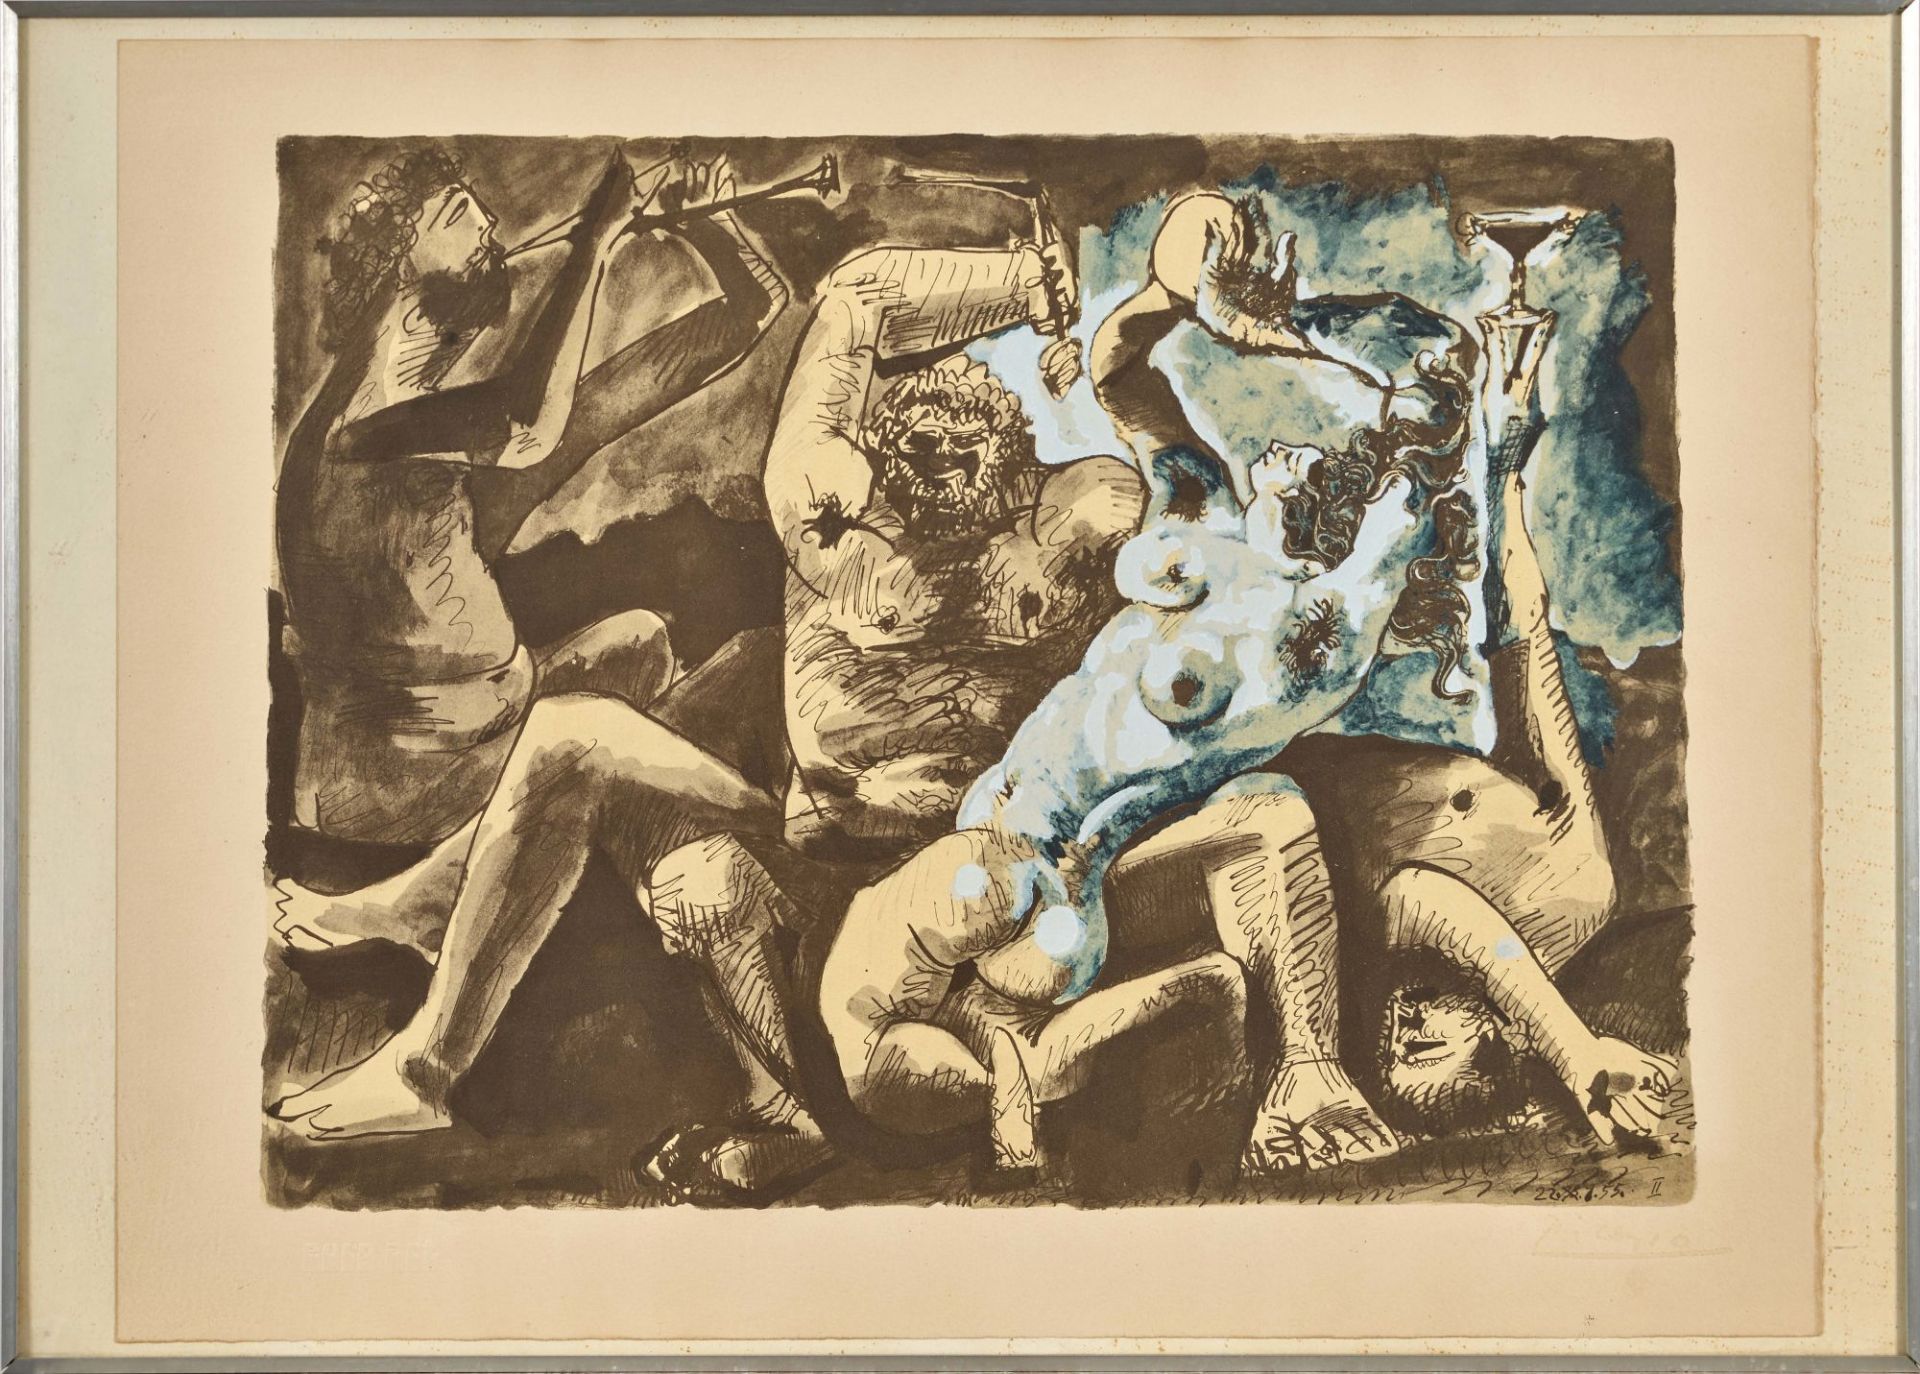 PICASSO, PABLO, Nach - After: "Bacchanale". - Image 2 of 2